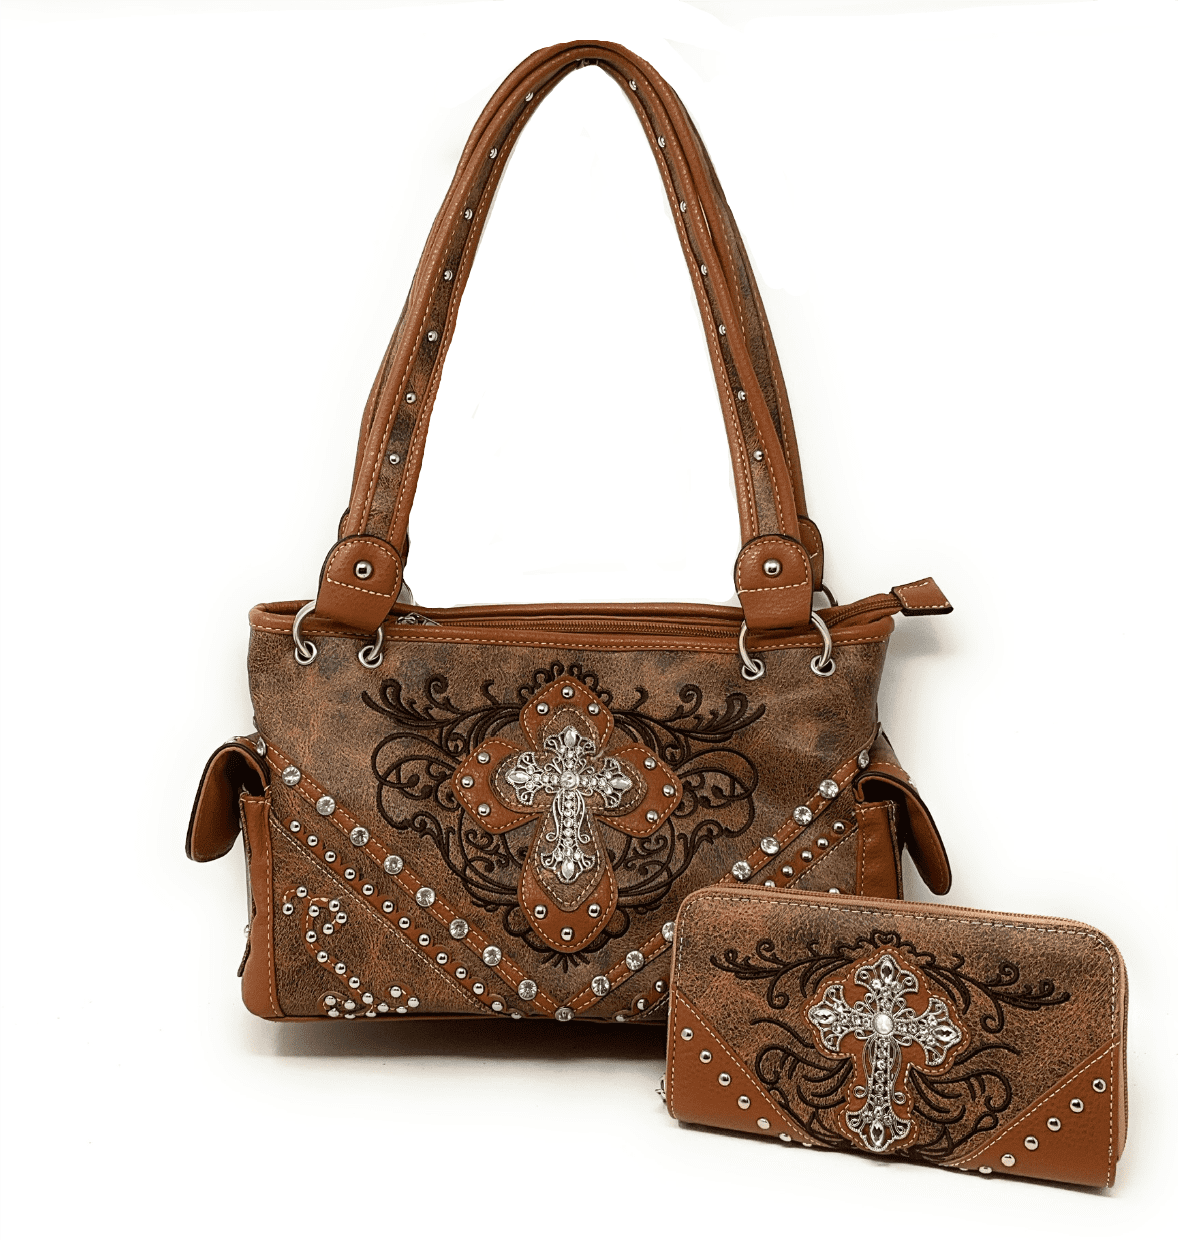 Purple Western Concealed Carry Purse And Wallet Set With Skull Embroidery -  $39.95 : Purse Obsession | Best Wholesale Handbags at the Cheapest Prices